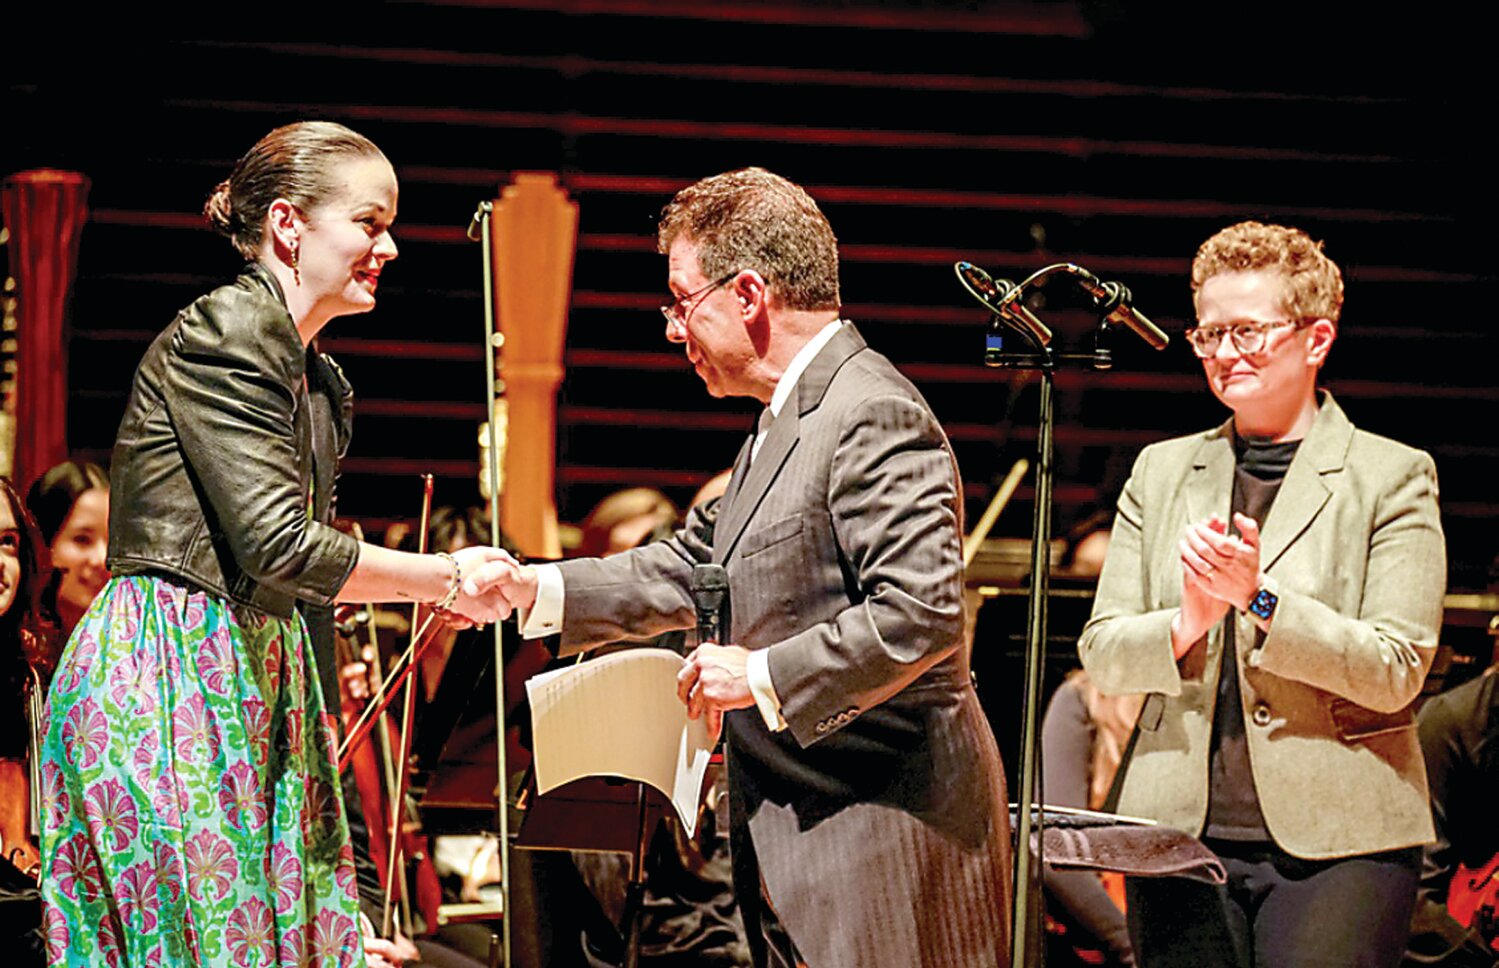 Noelle Casella Grand is honored in Verizon Hall at the Kimmel Center by Maestro Louis Scaglione and  Philadelphia Youth Orchestra Music Institute COO Colleen Hood.